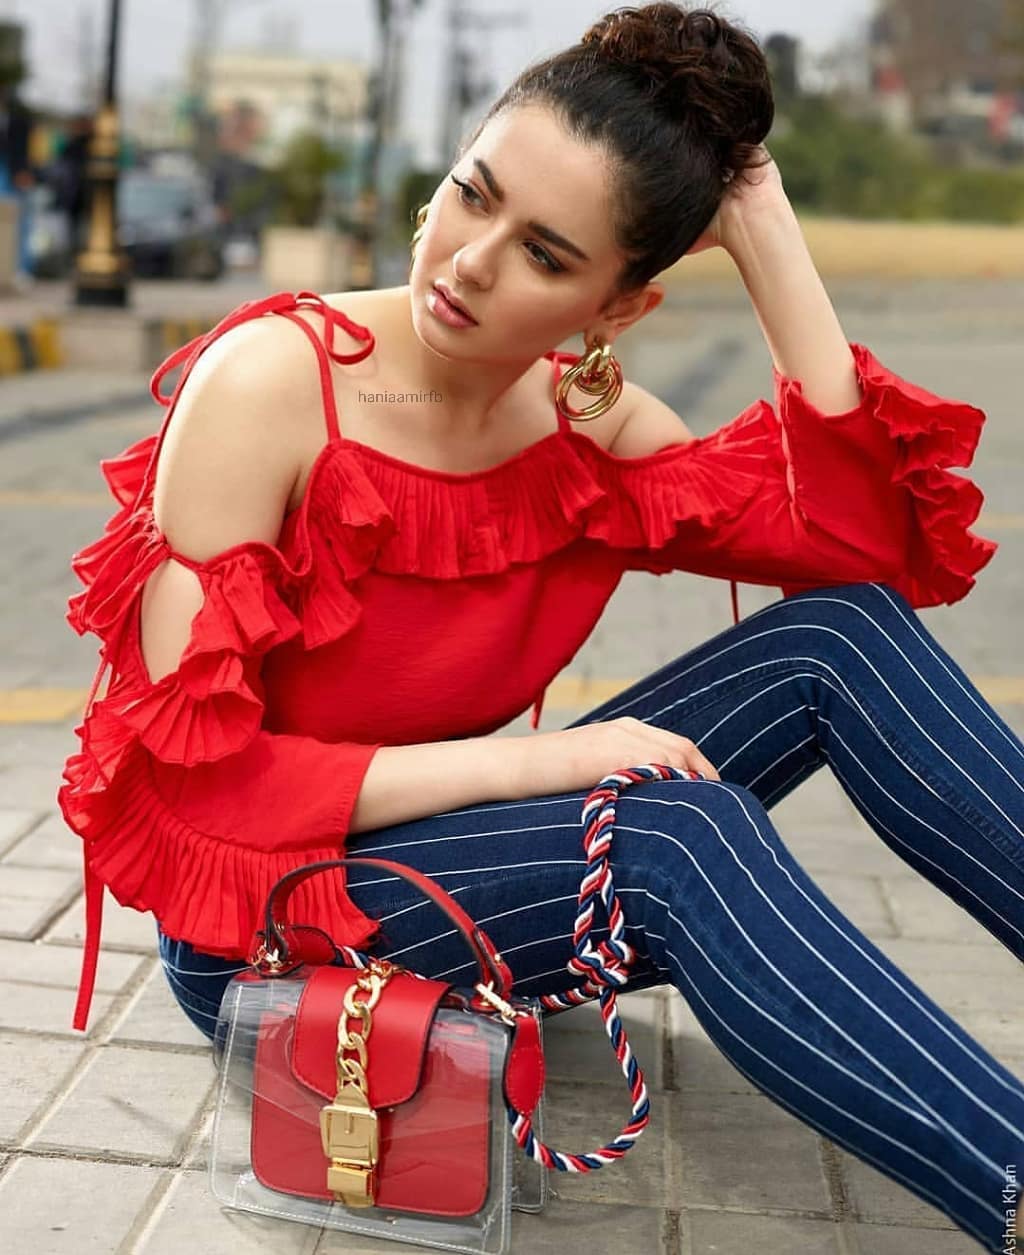 Hania Aamir Latest Beautiful Picture Collection from Instagram